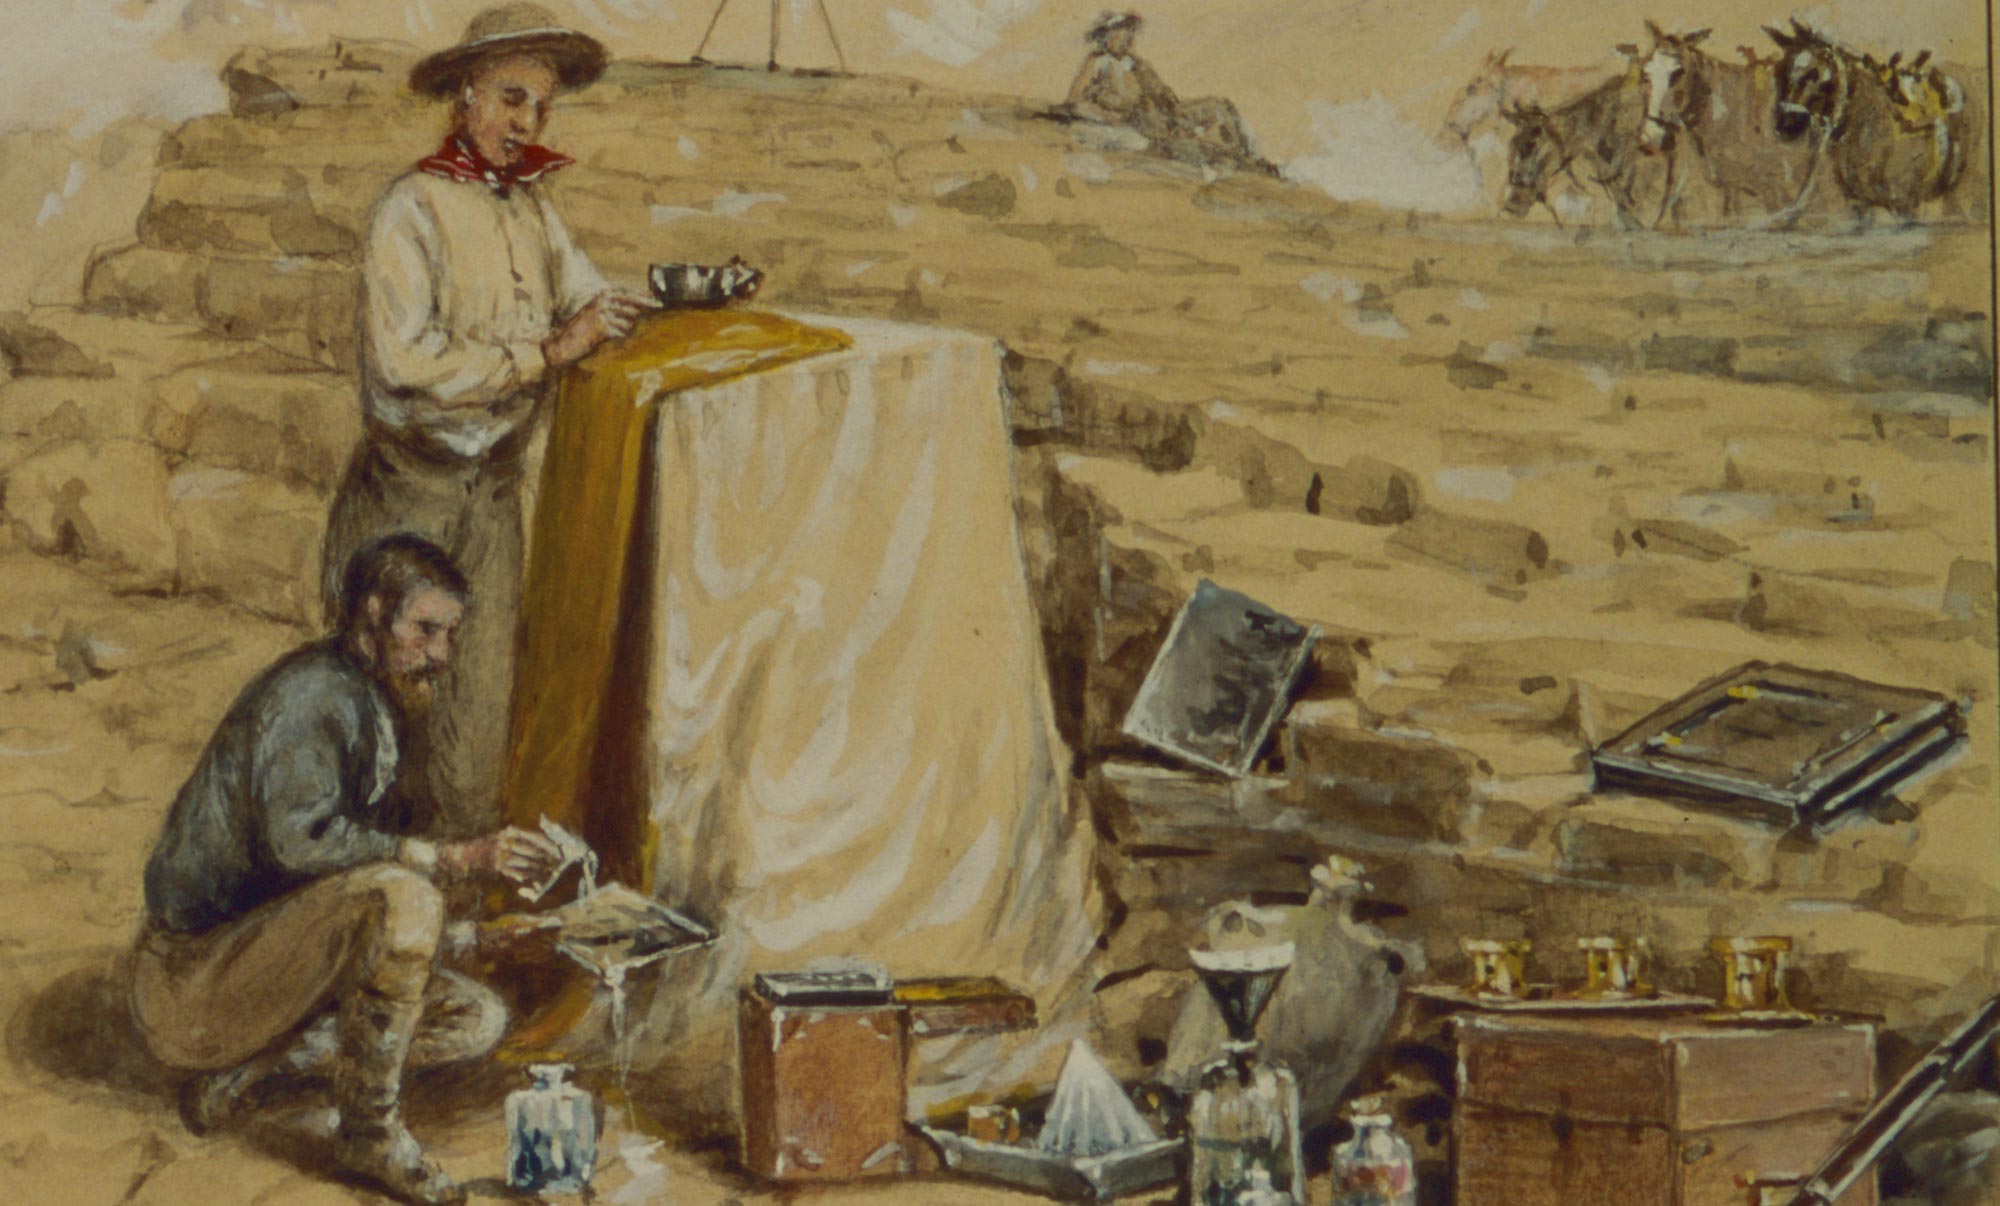 Watercolor of Two males, pack animals and boxes of glass negatives to depict the process of wet plate photography